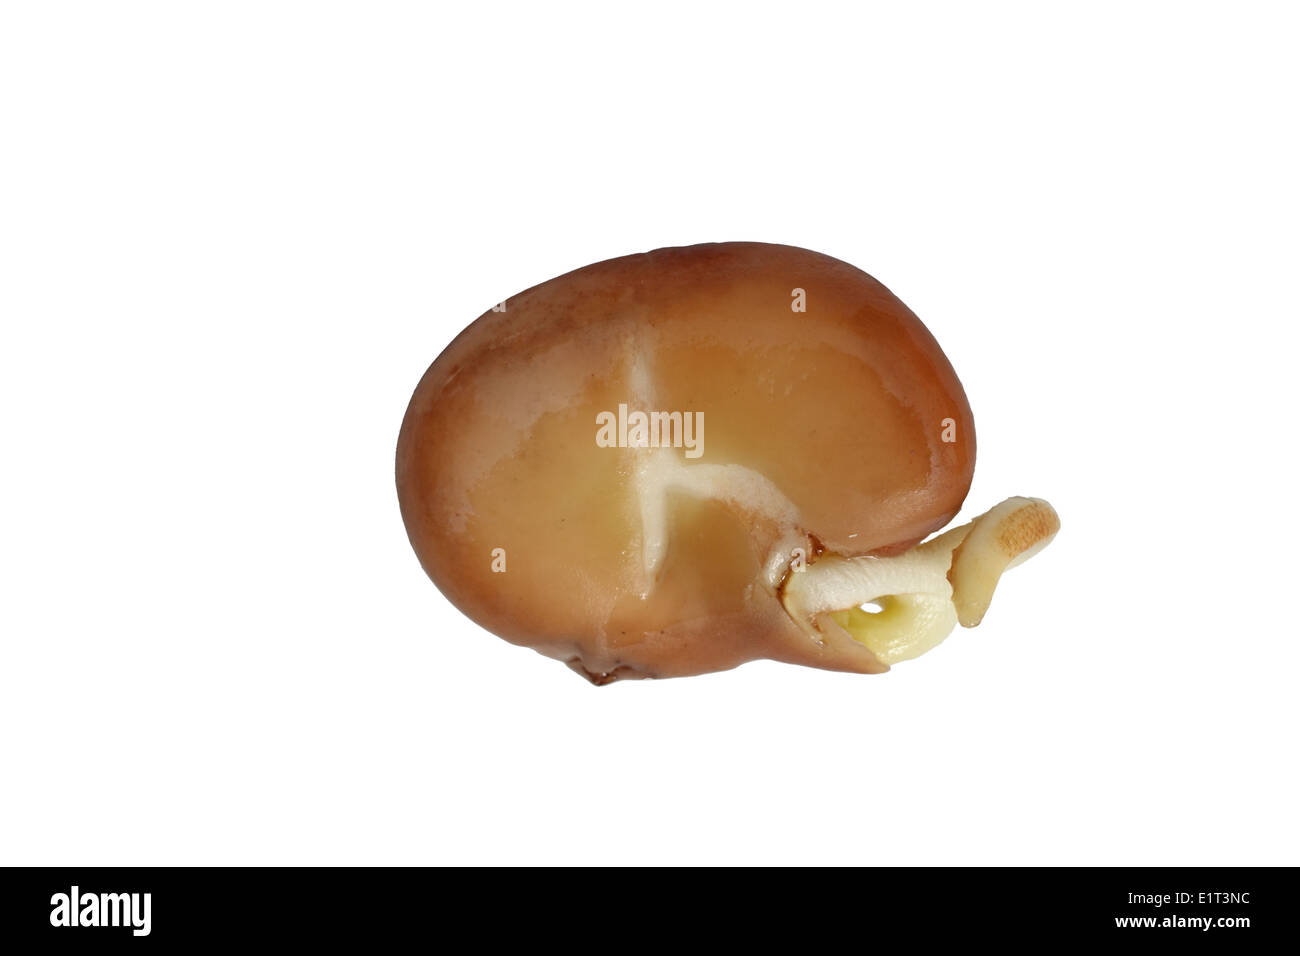 Germinating broad bean seed showing developing root and shoot Stock Photo